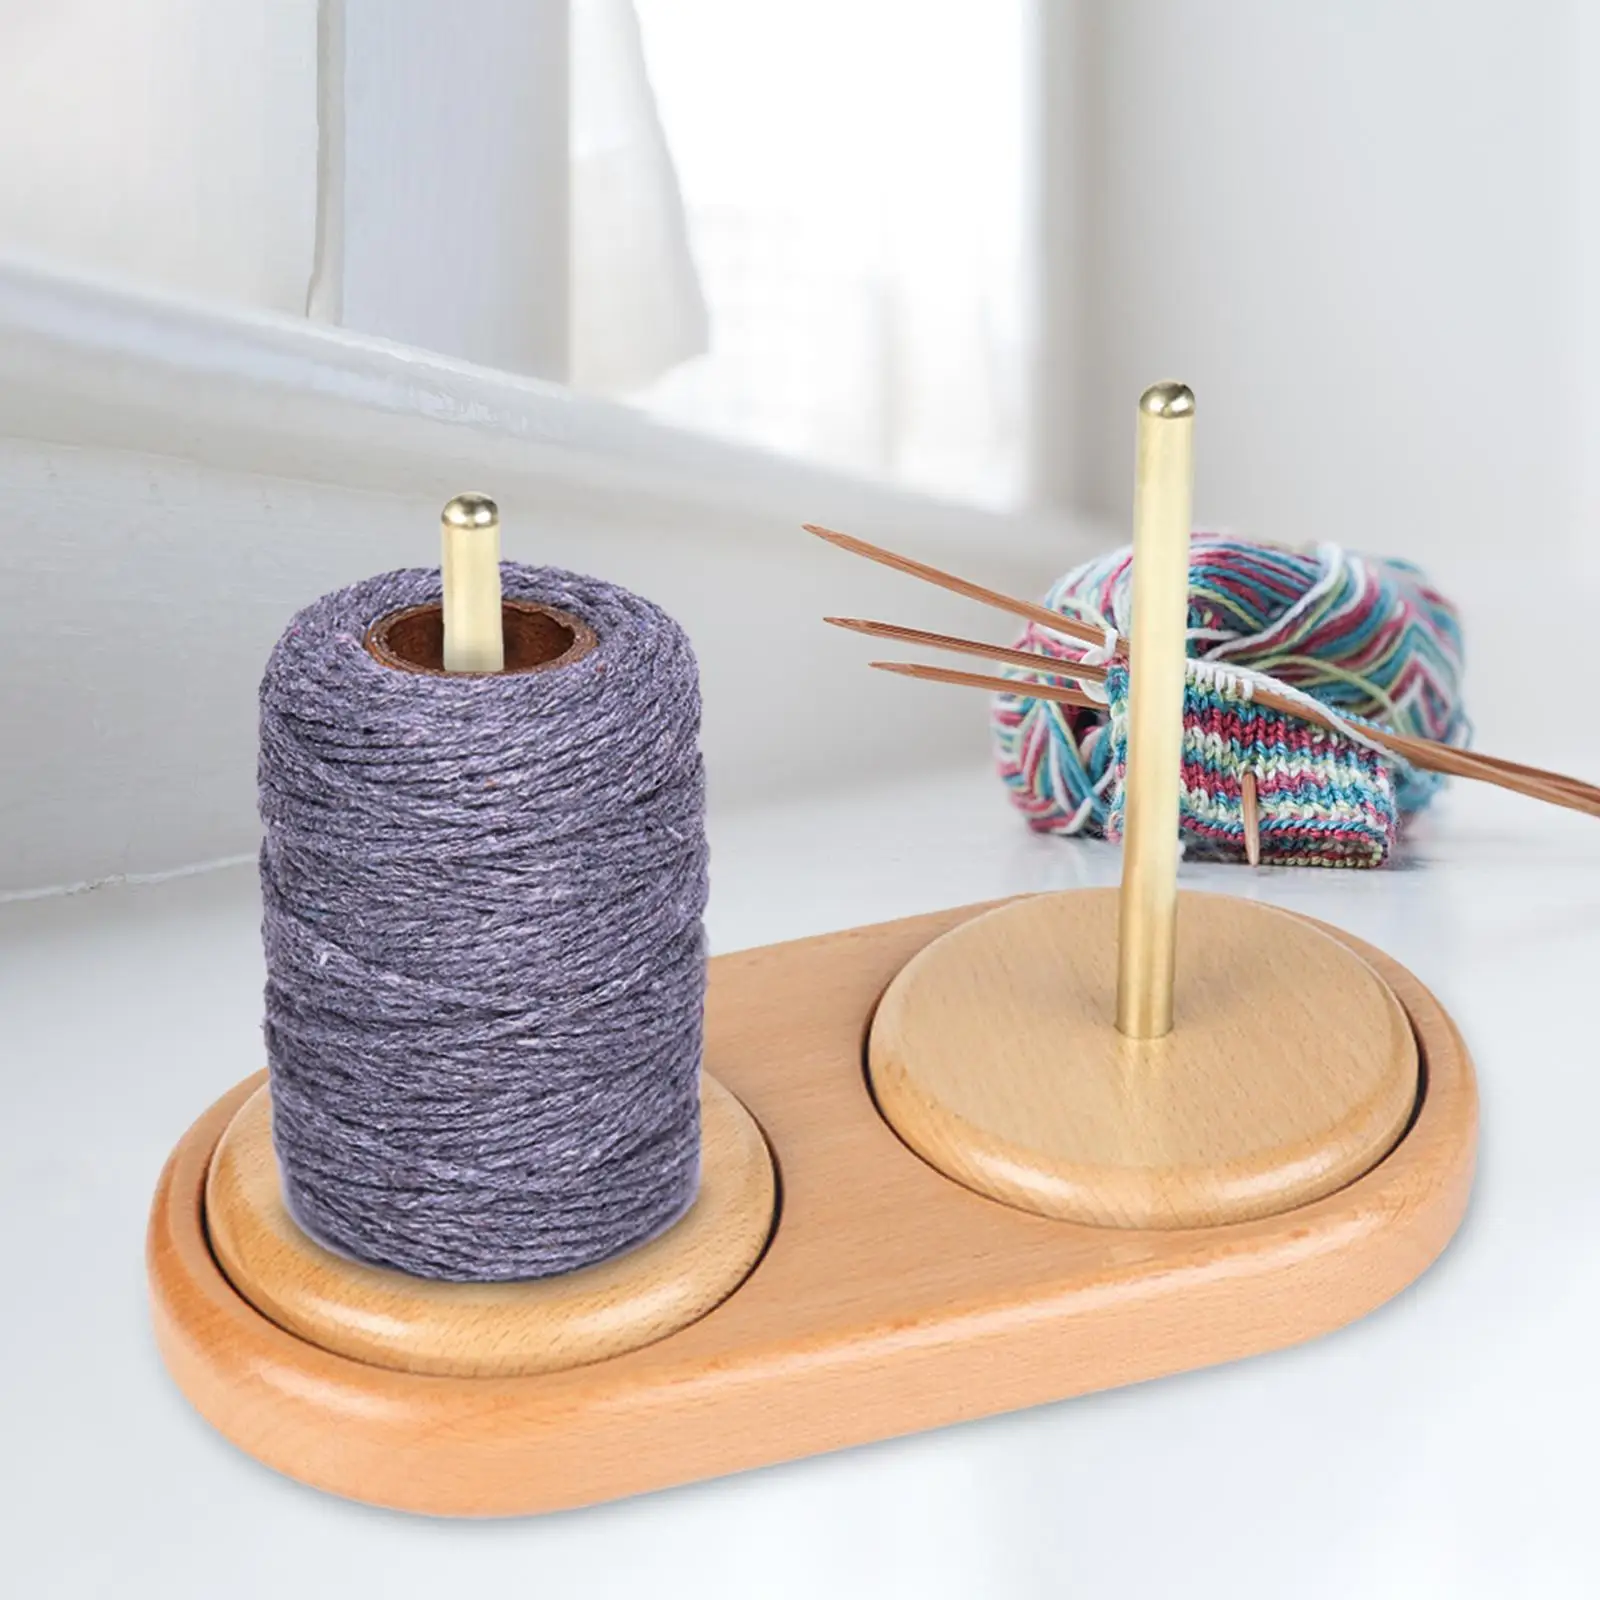 Creative Yarn Holder Hold 2 yarns Prevent Thread Tangling Roll Paper Towel Holder Durable Yarn Dispenser for Wife